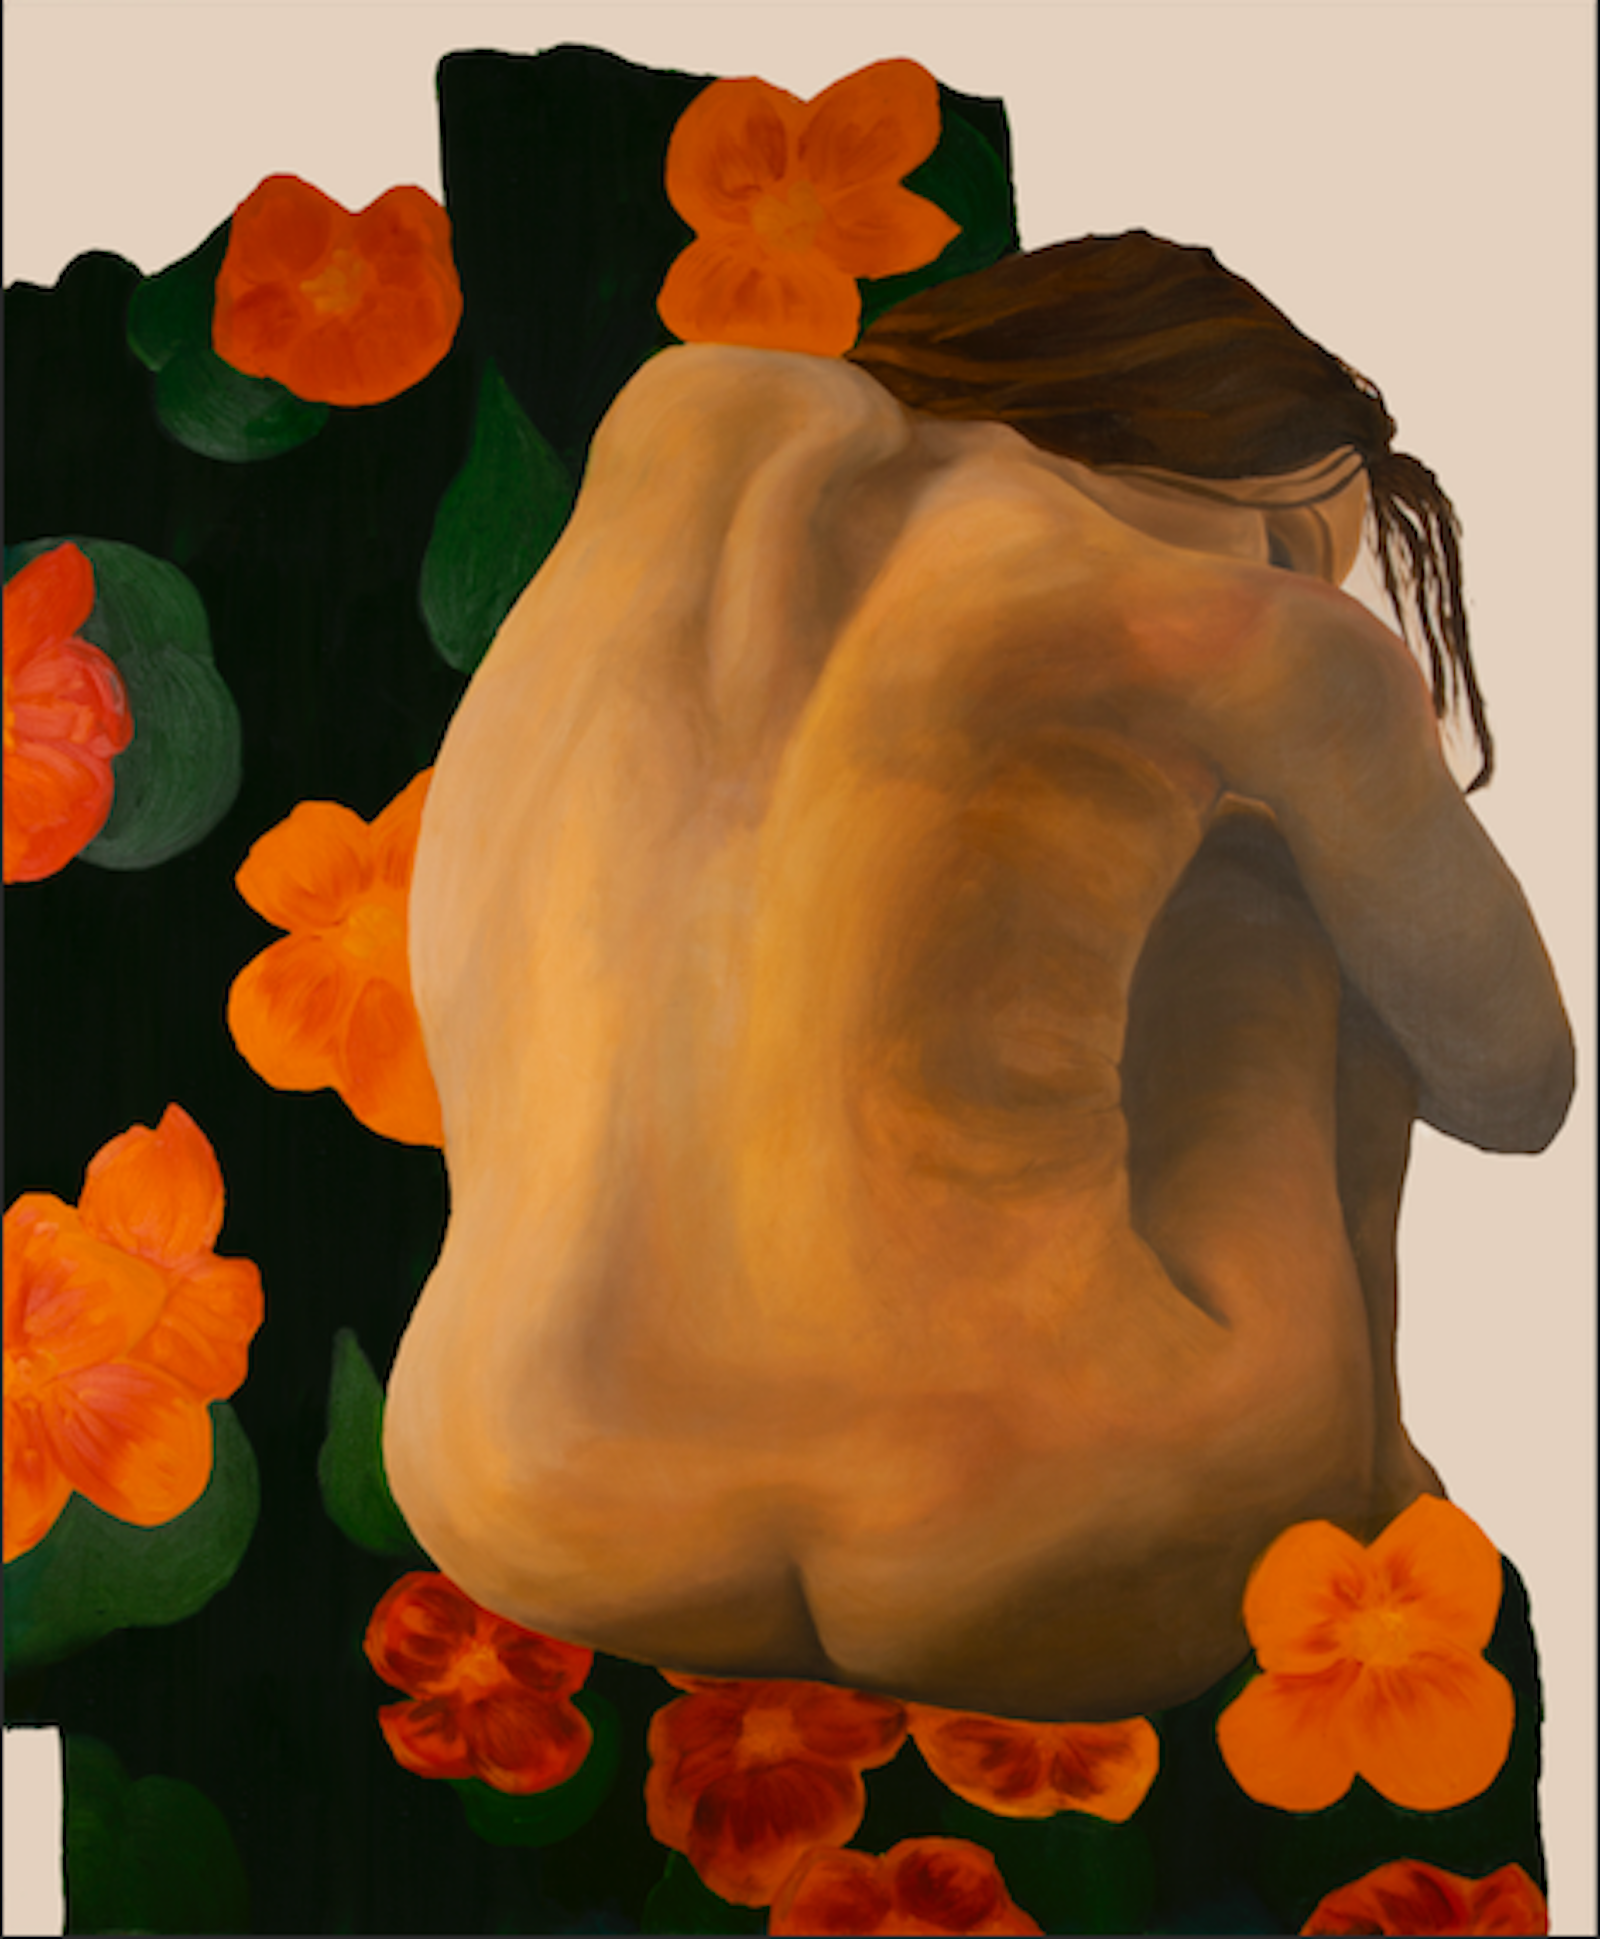 A painting of a woman clutching her knees from behind her back, surrounded by flowers